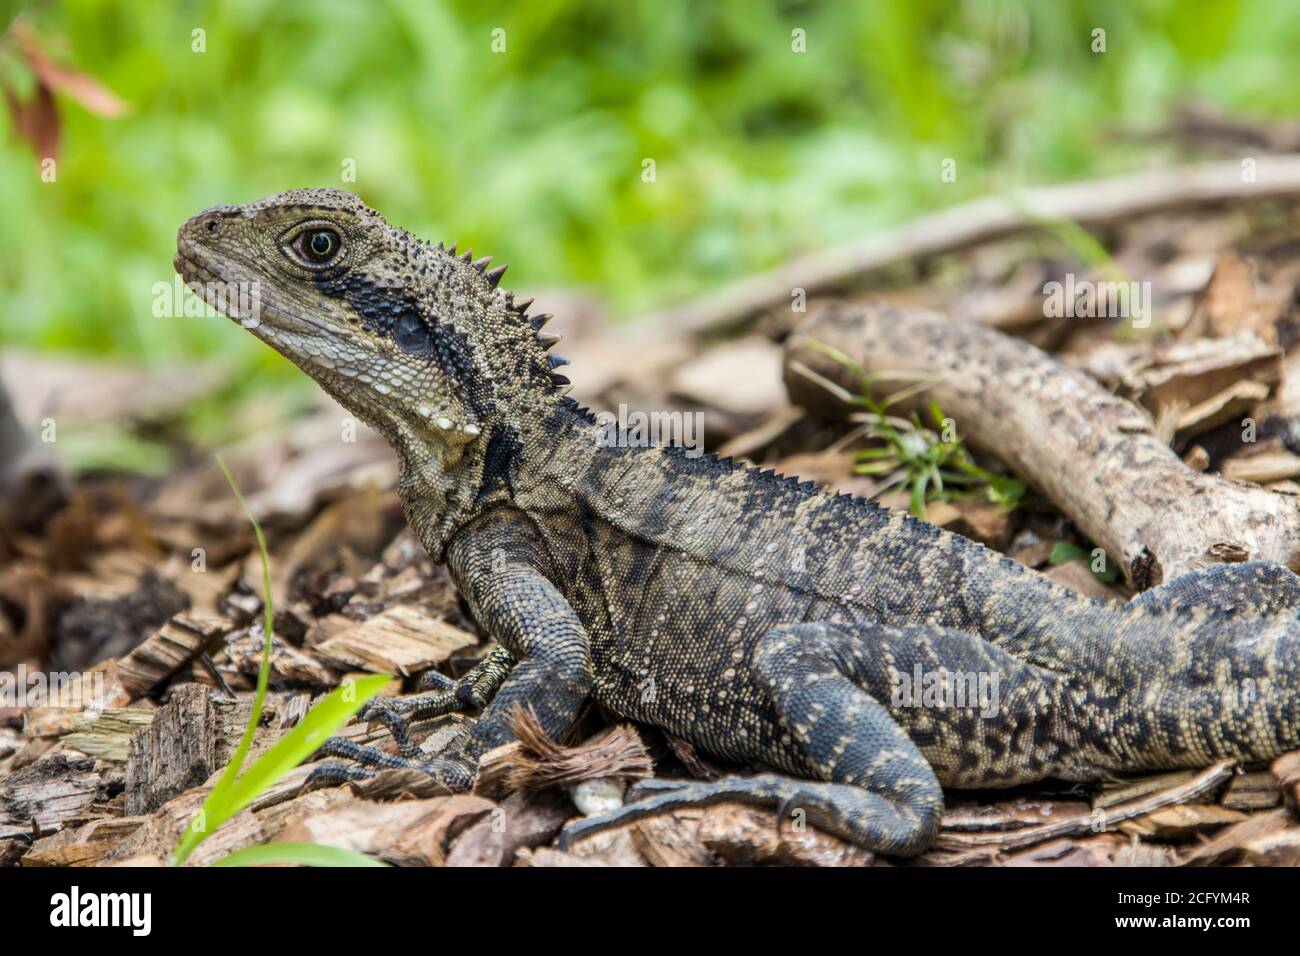 The Australian water dragon (Intellagama lesueurii, formerly Physignathus lesueurii ) is an arboreal agamid species native to eastern Australia. Stock Photo